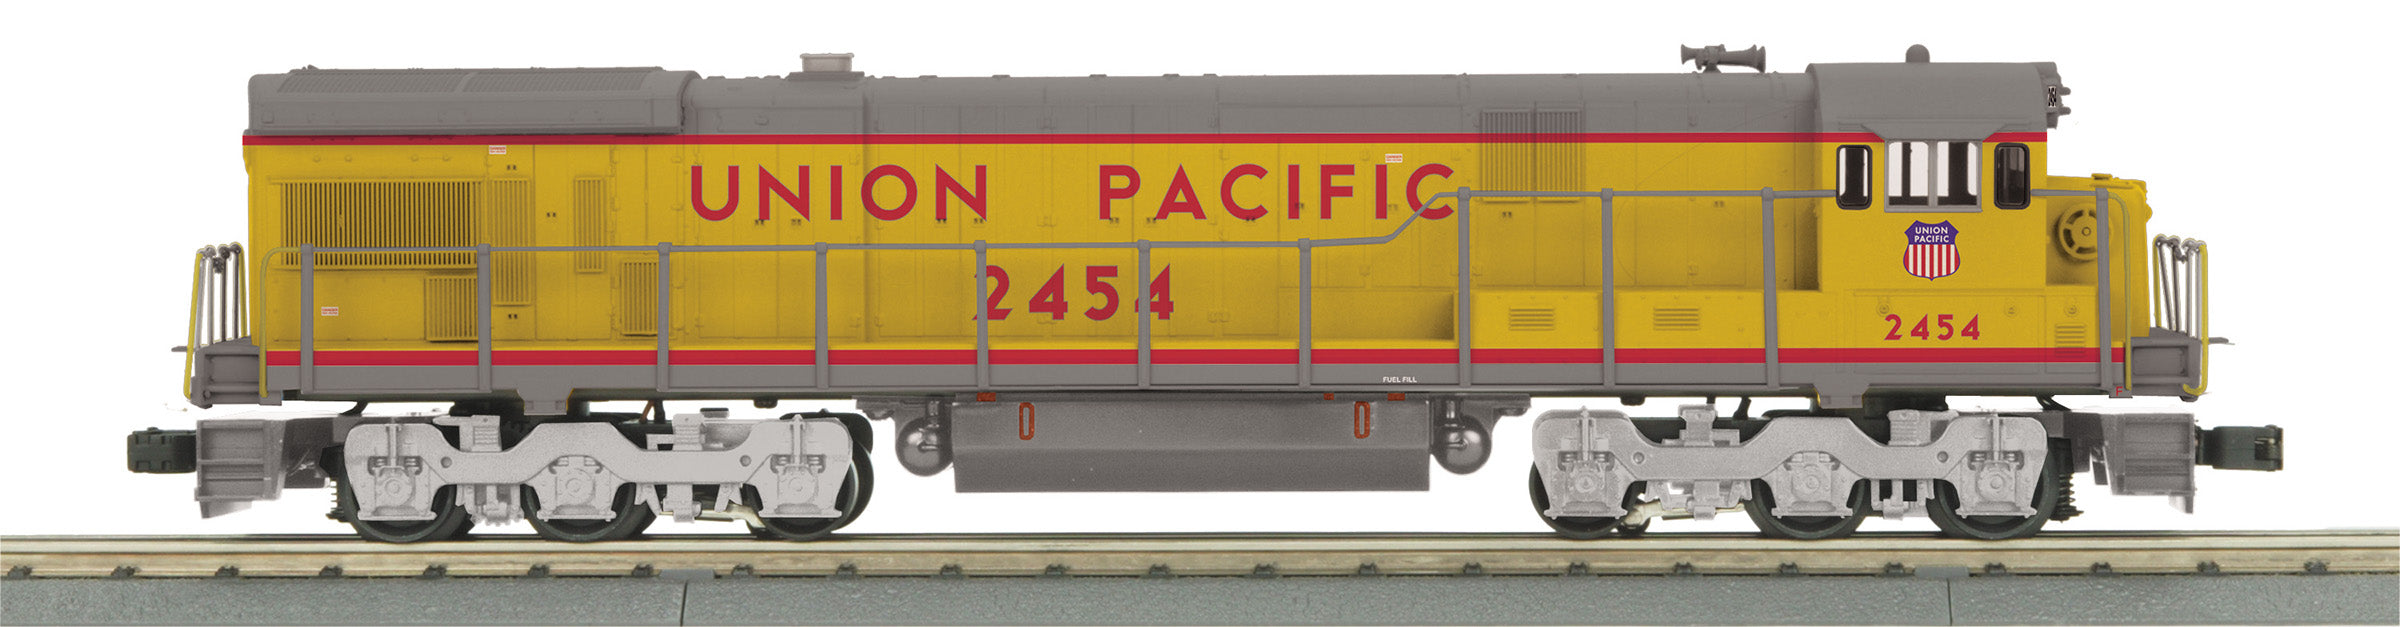 MTH 30-21265-1 - C30-7 Diesel Engine "Union Pacific" #2454 w/ PS3